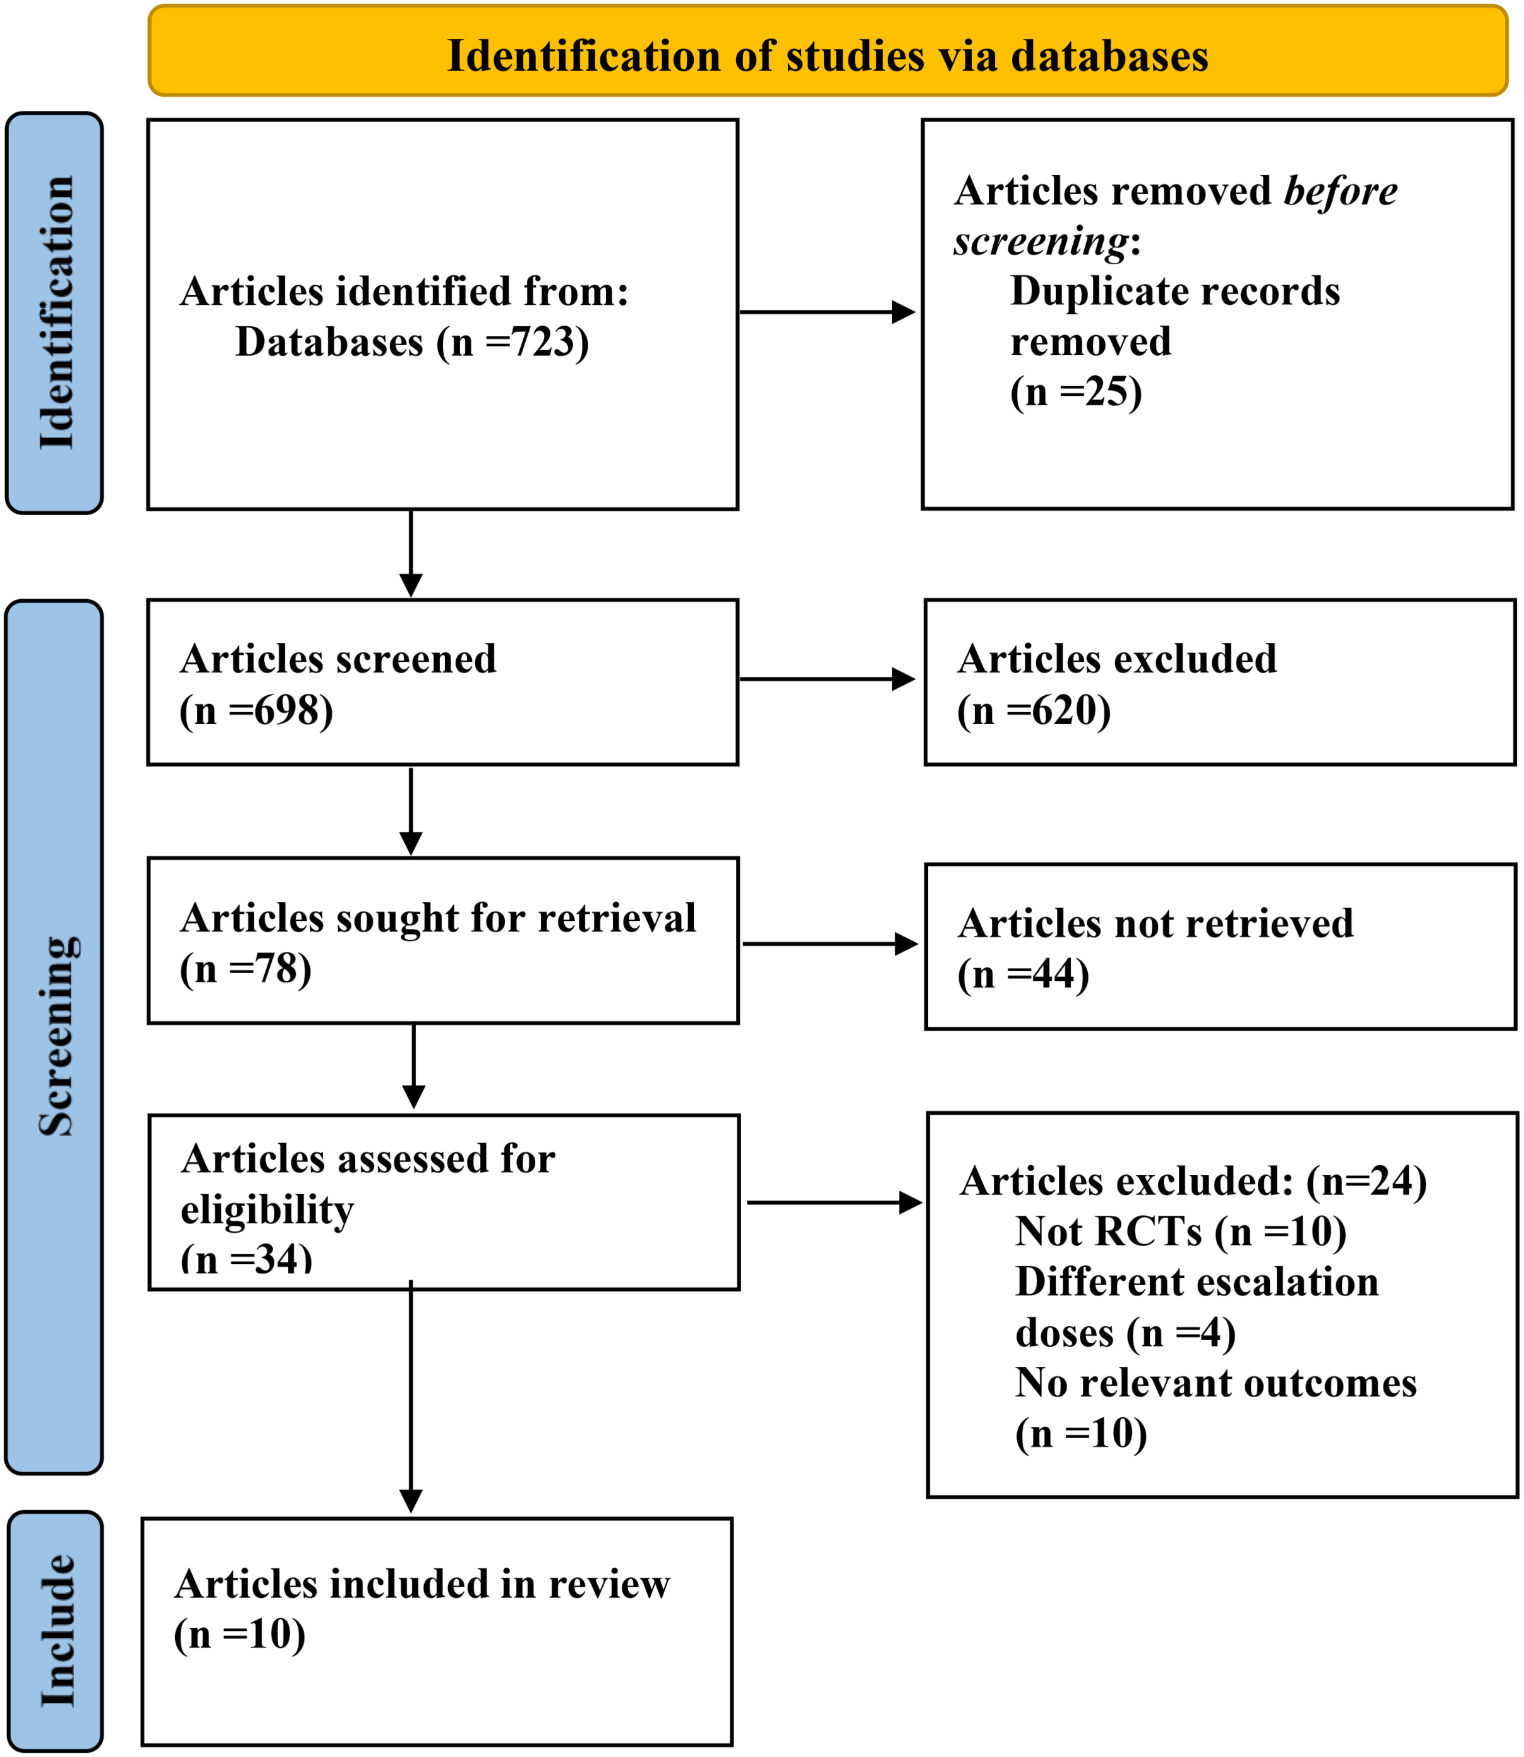 Evaluating the effectiveness and safety of various Tirzepatide dosages in the management of Type 2 diabetes mellitus: a network meta-analysis of randomized controlled trials